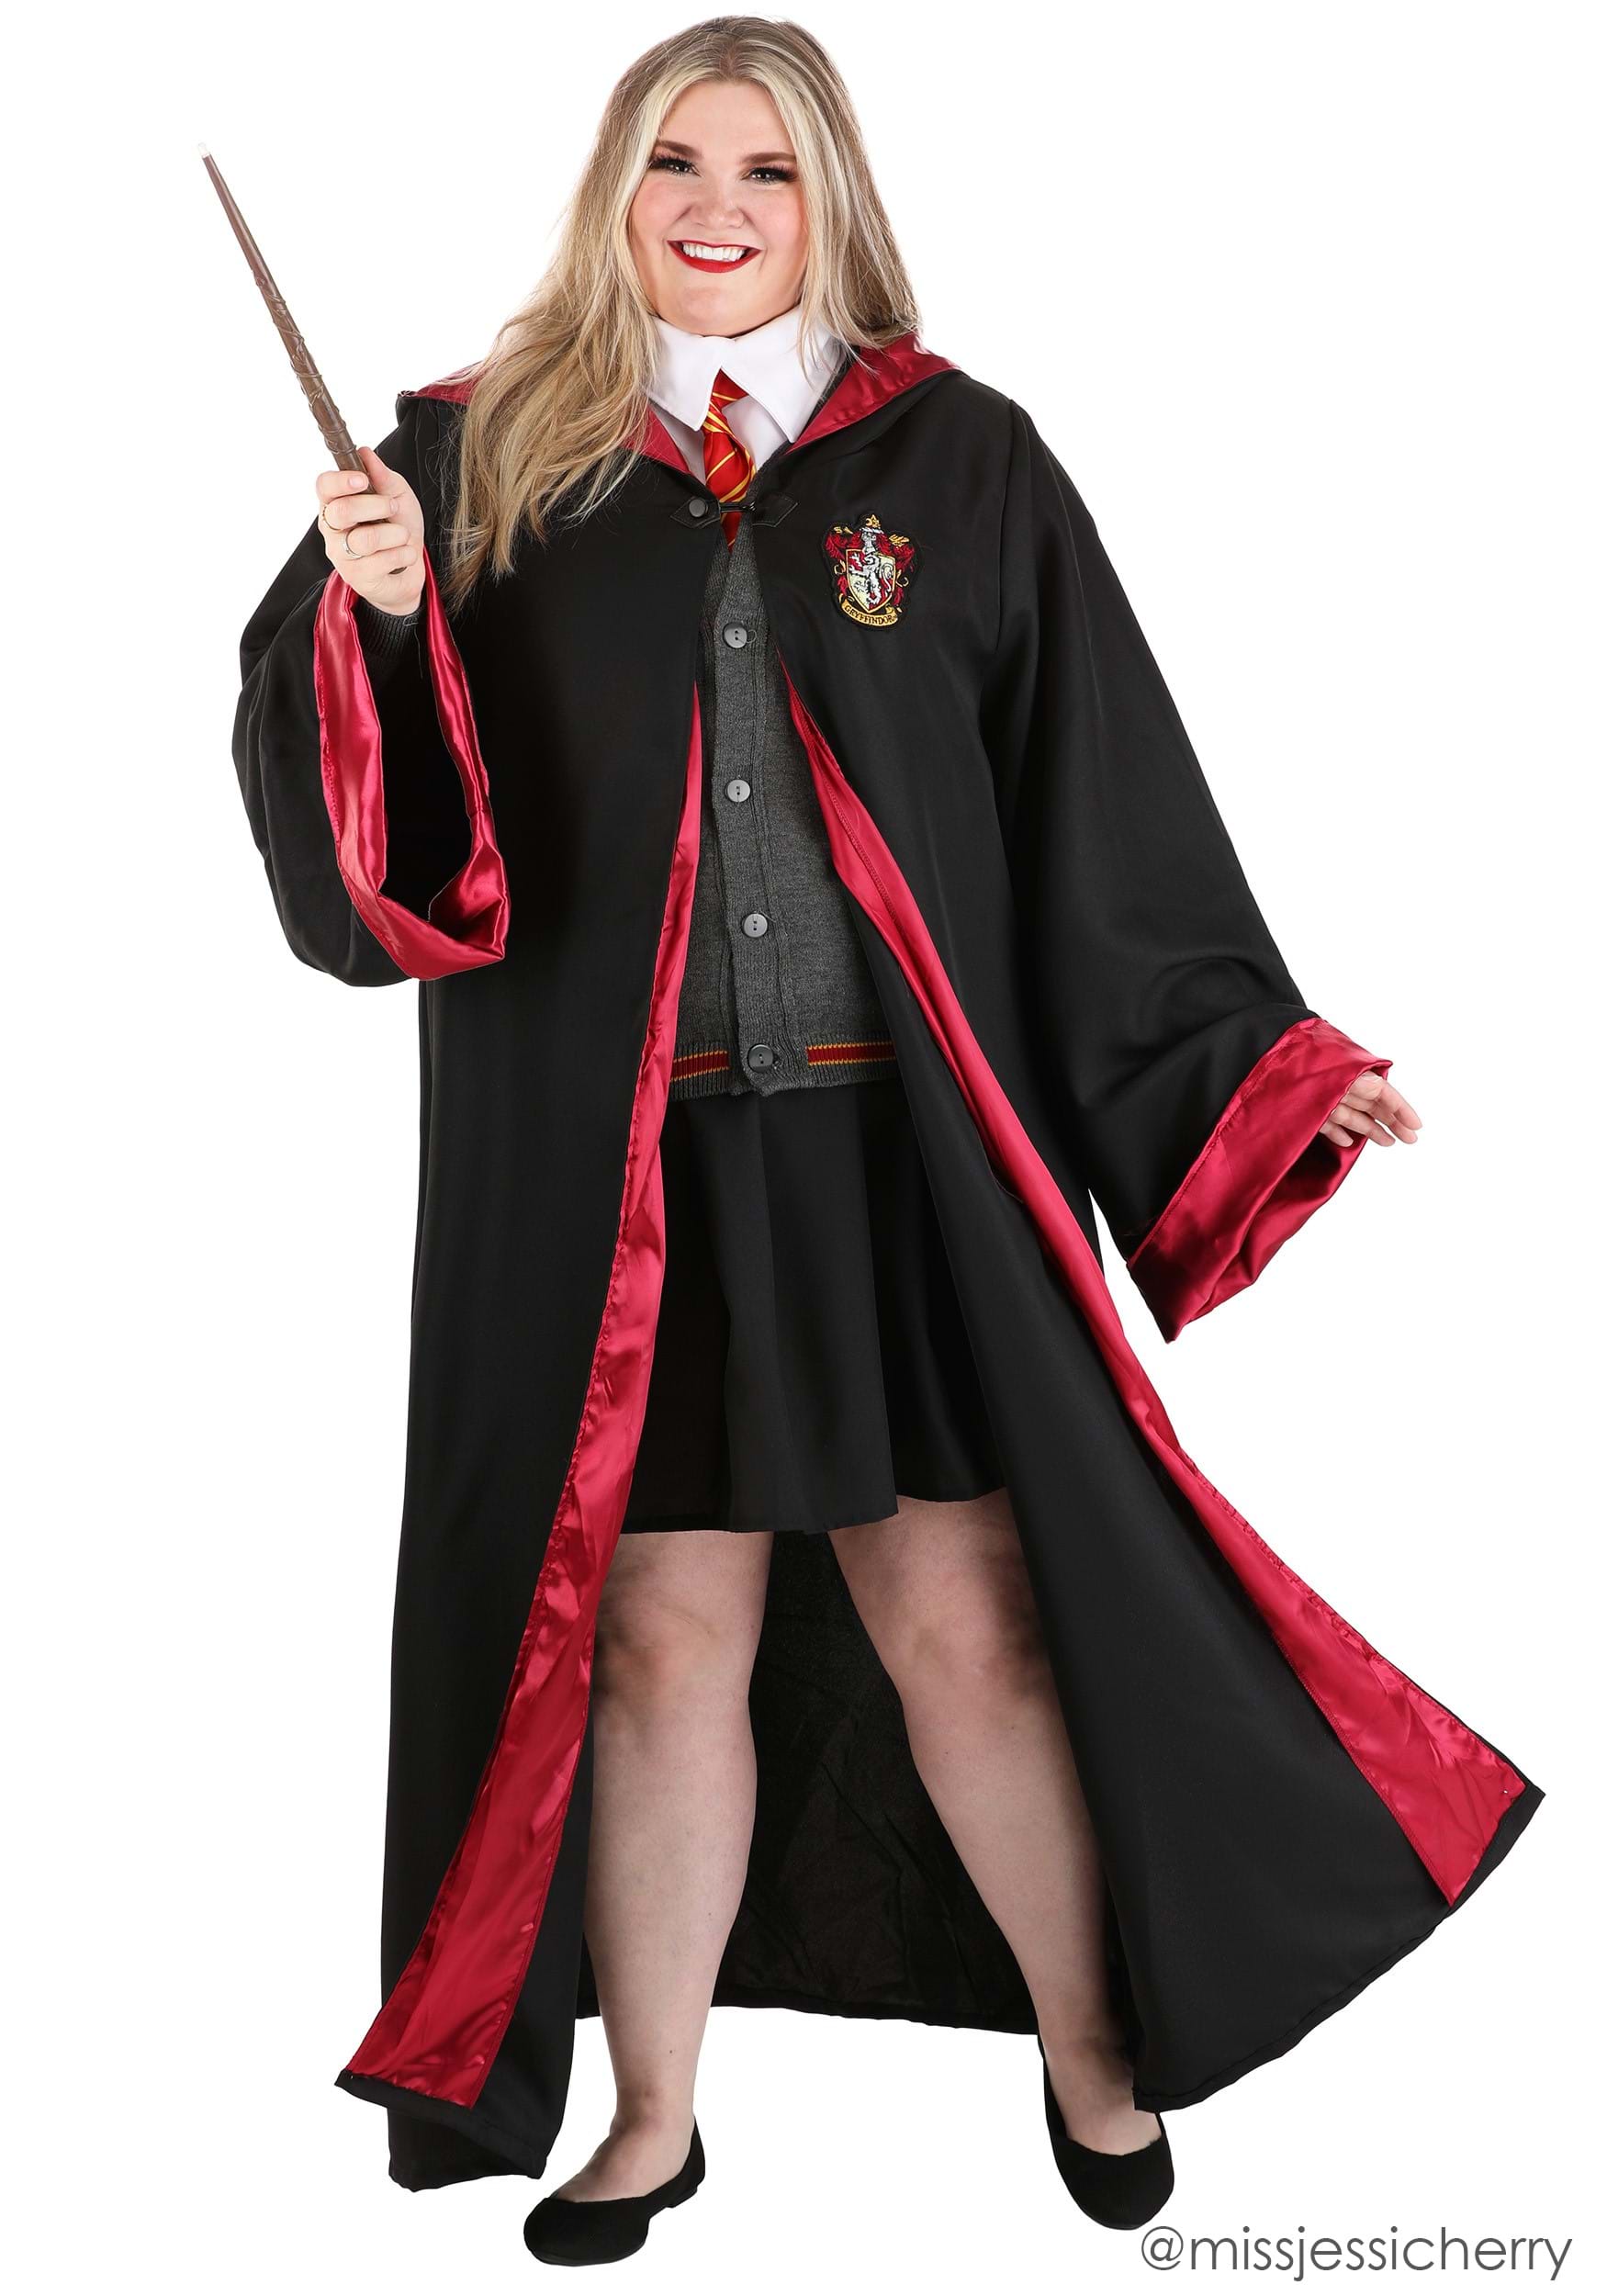 https://images.fun.com/products/64160/1-1/womens-plus-size-deluxe-harry-potter-hermione-costume.jpg